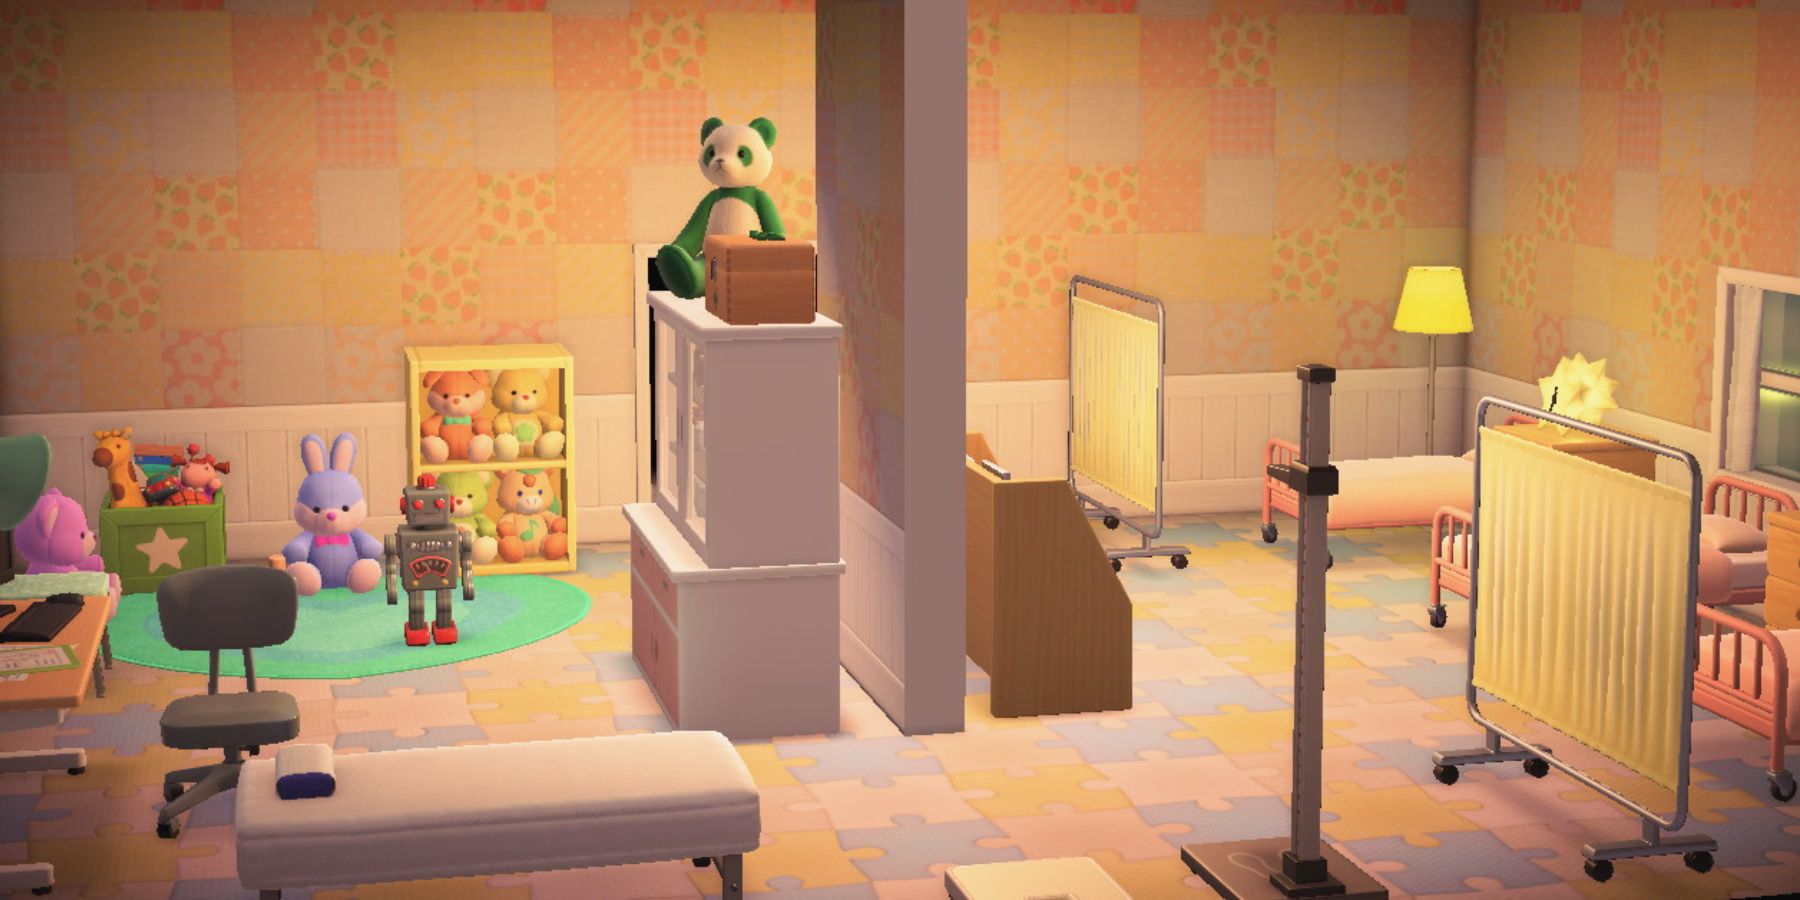 Players can design a pediatric hospital in Animal Crossing Happy Home Paradise.